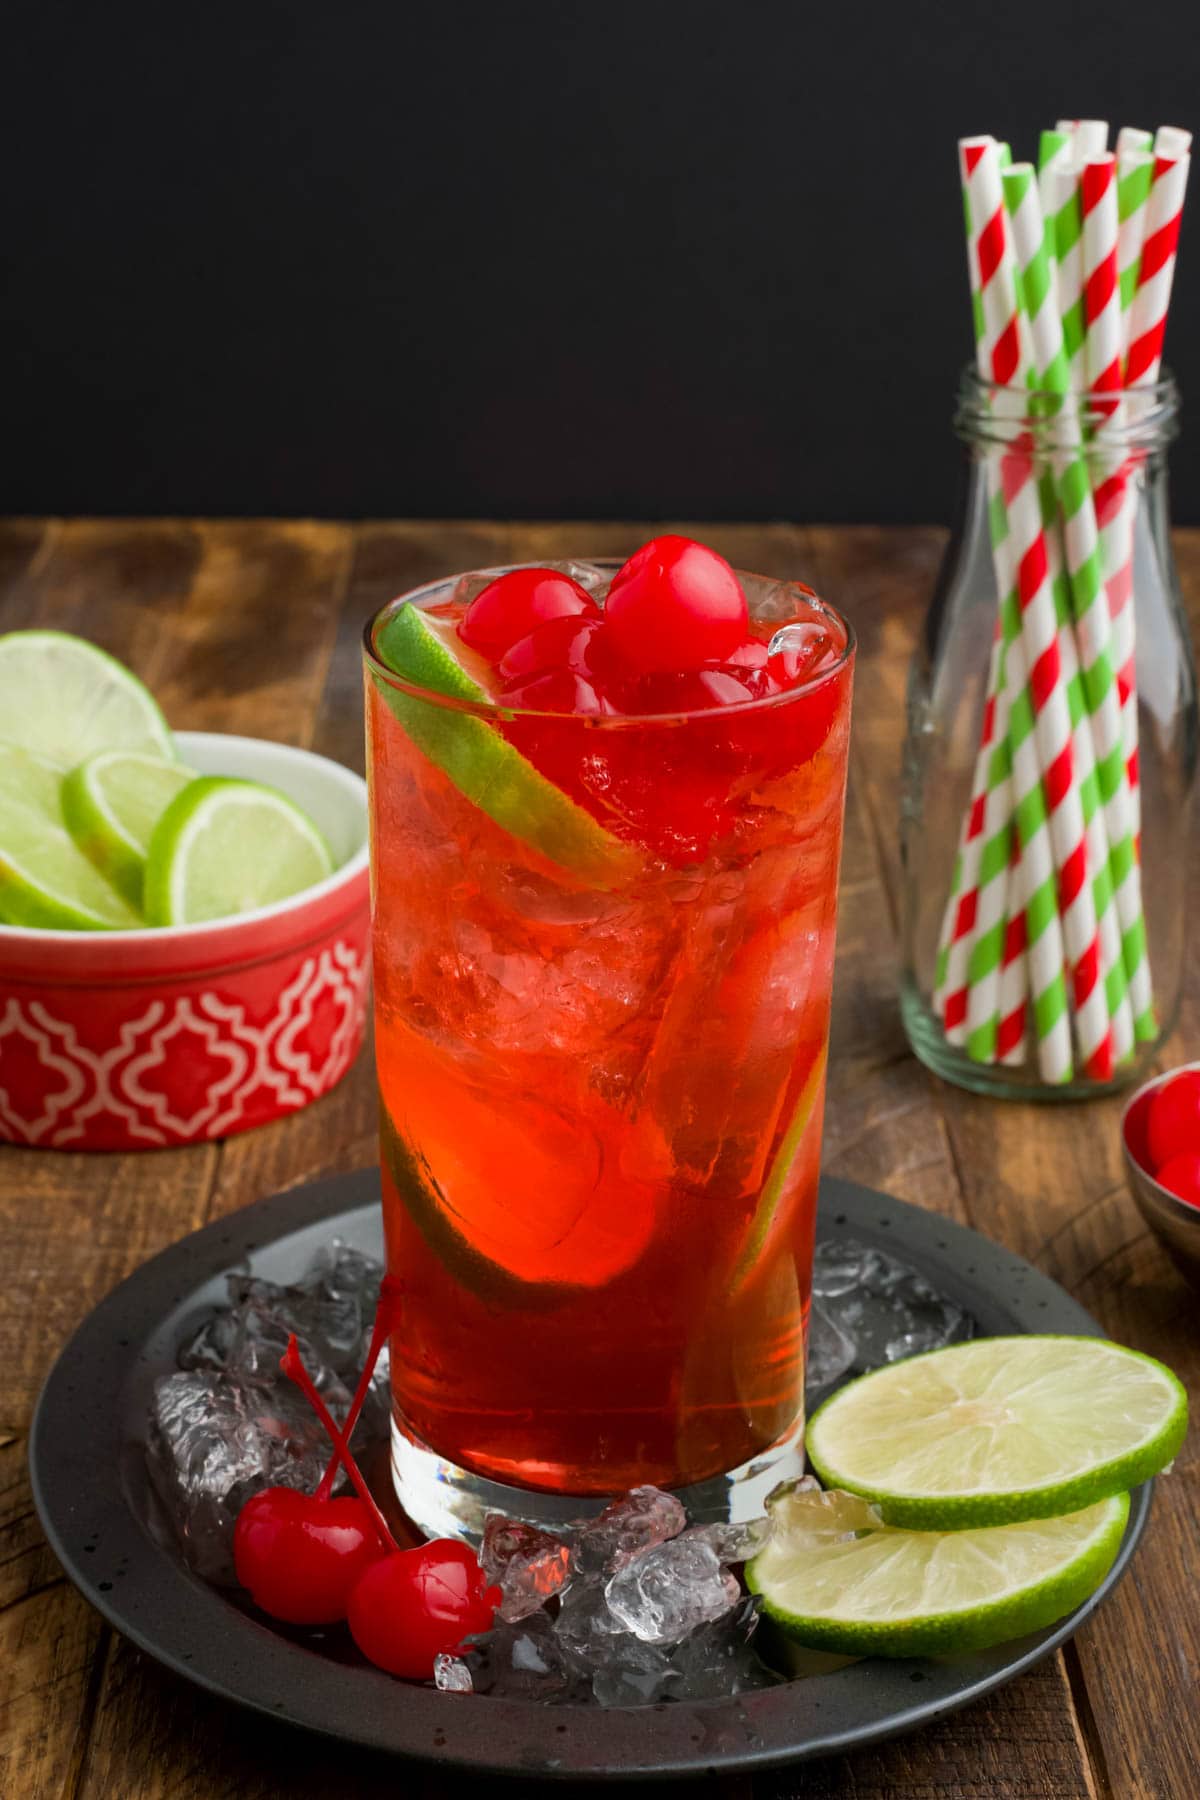 Red beverage with limes and cherries in a tall glass.